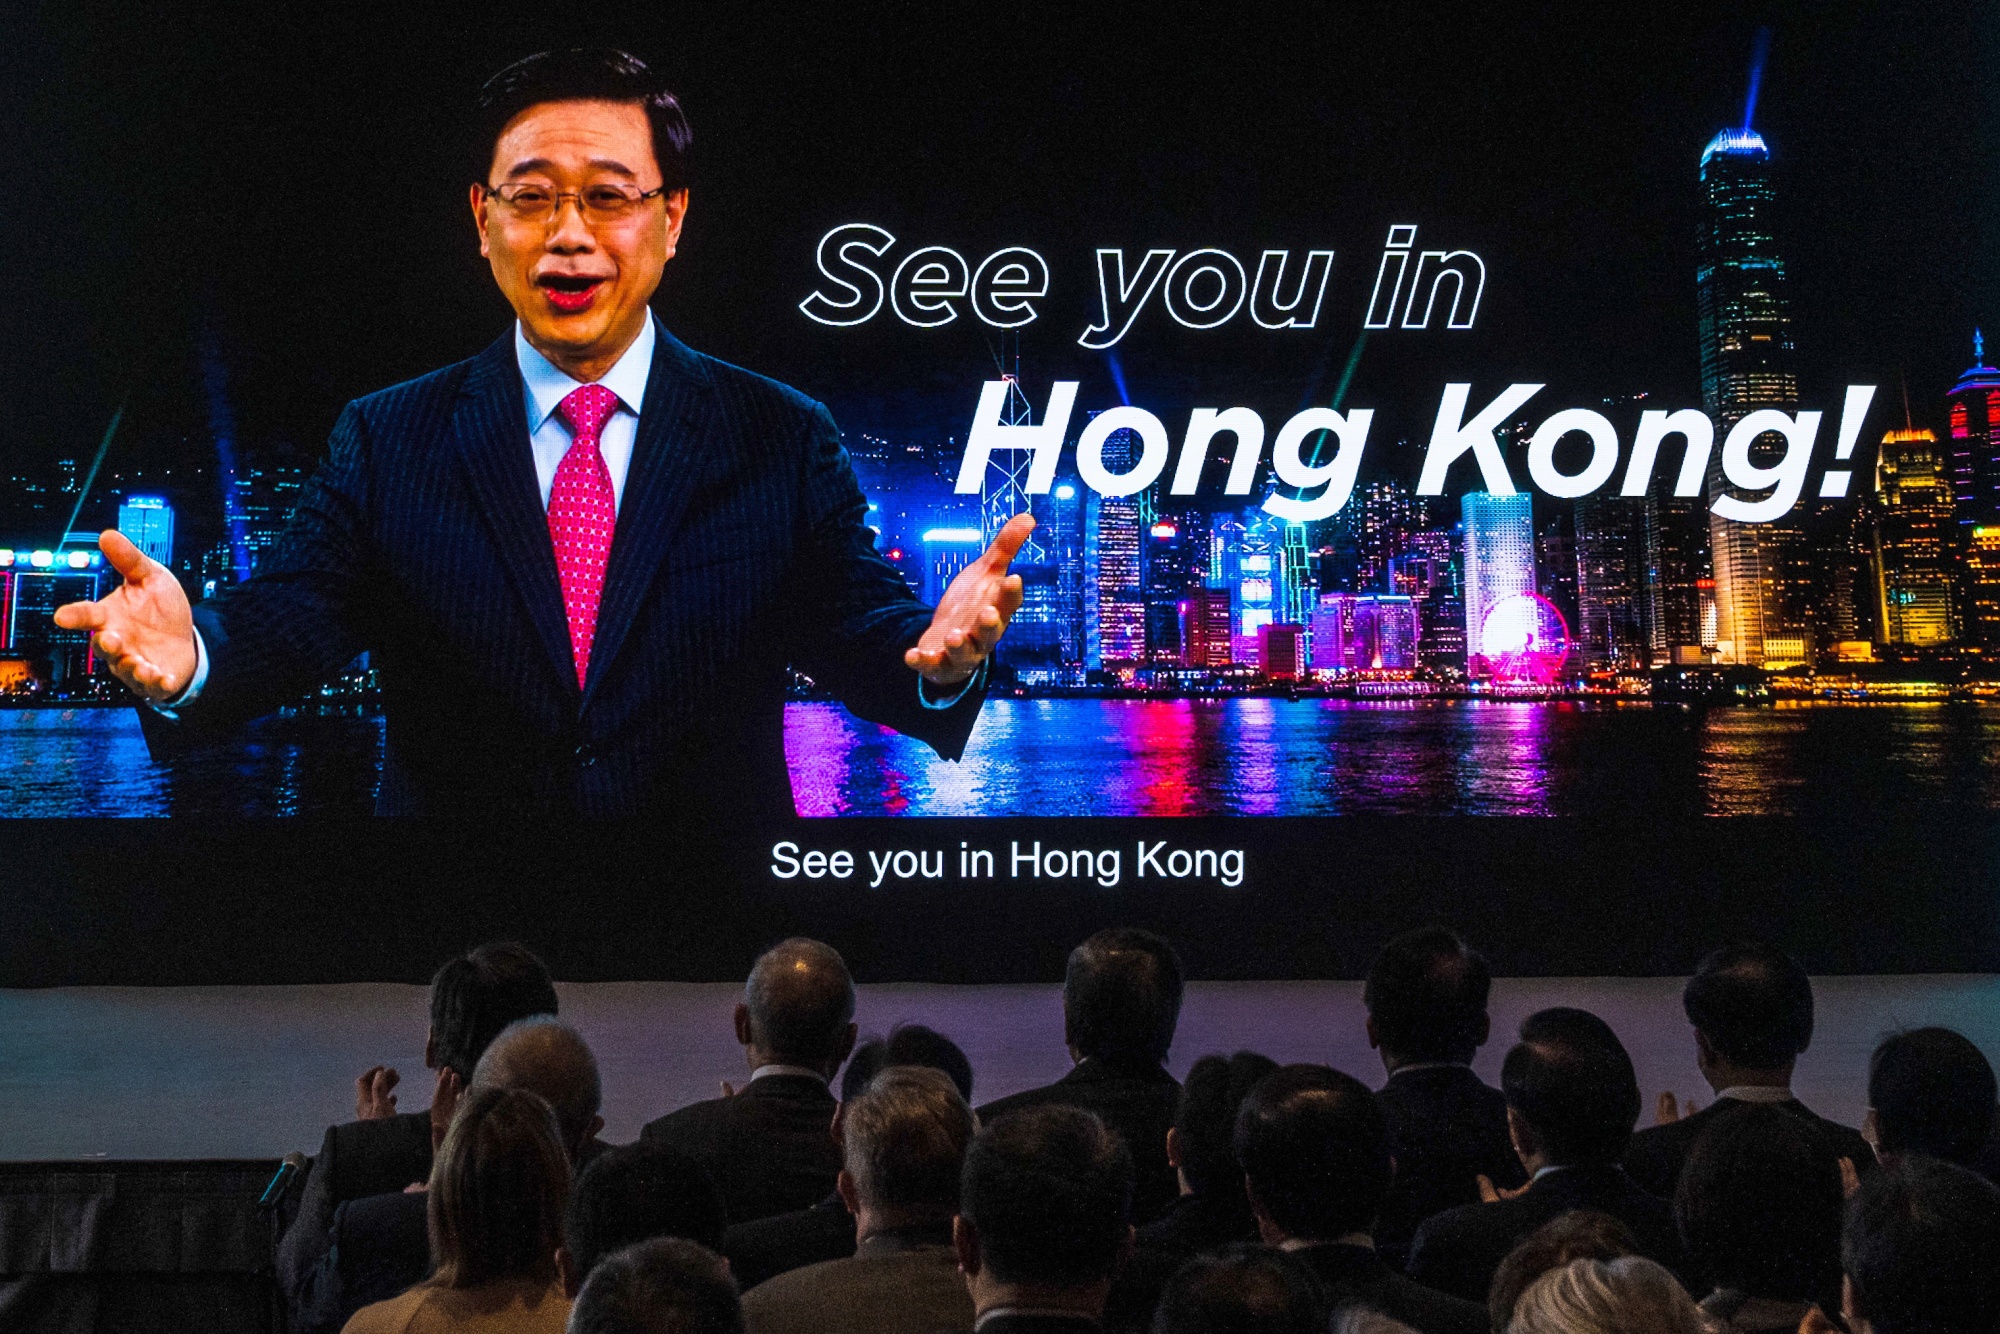 A promotional video featuring John Lee, Hong Kong’s chief executive, on a screen during the Hello Hong Kong campaign launch ceremony.